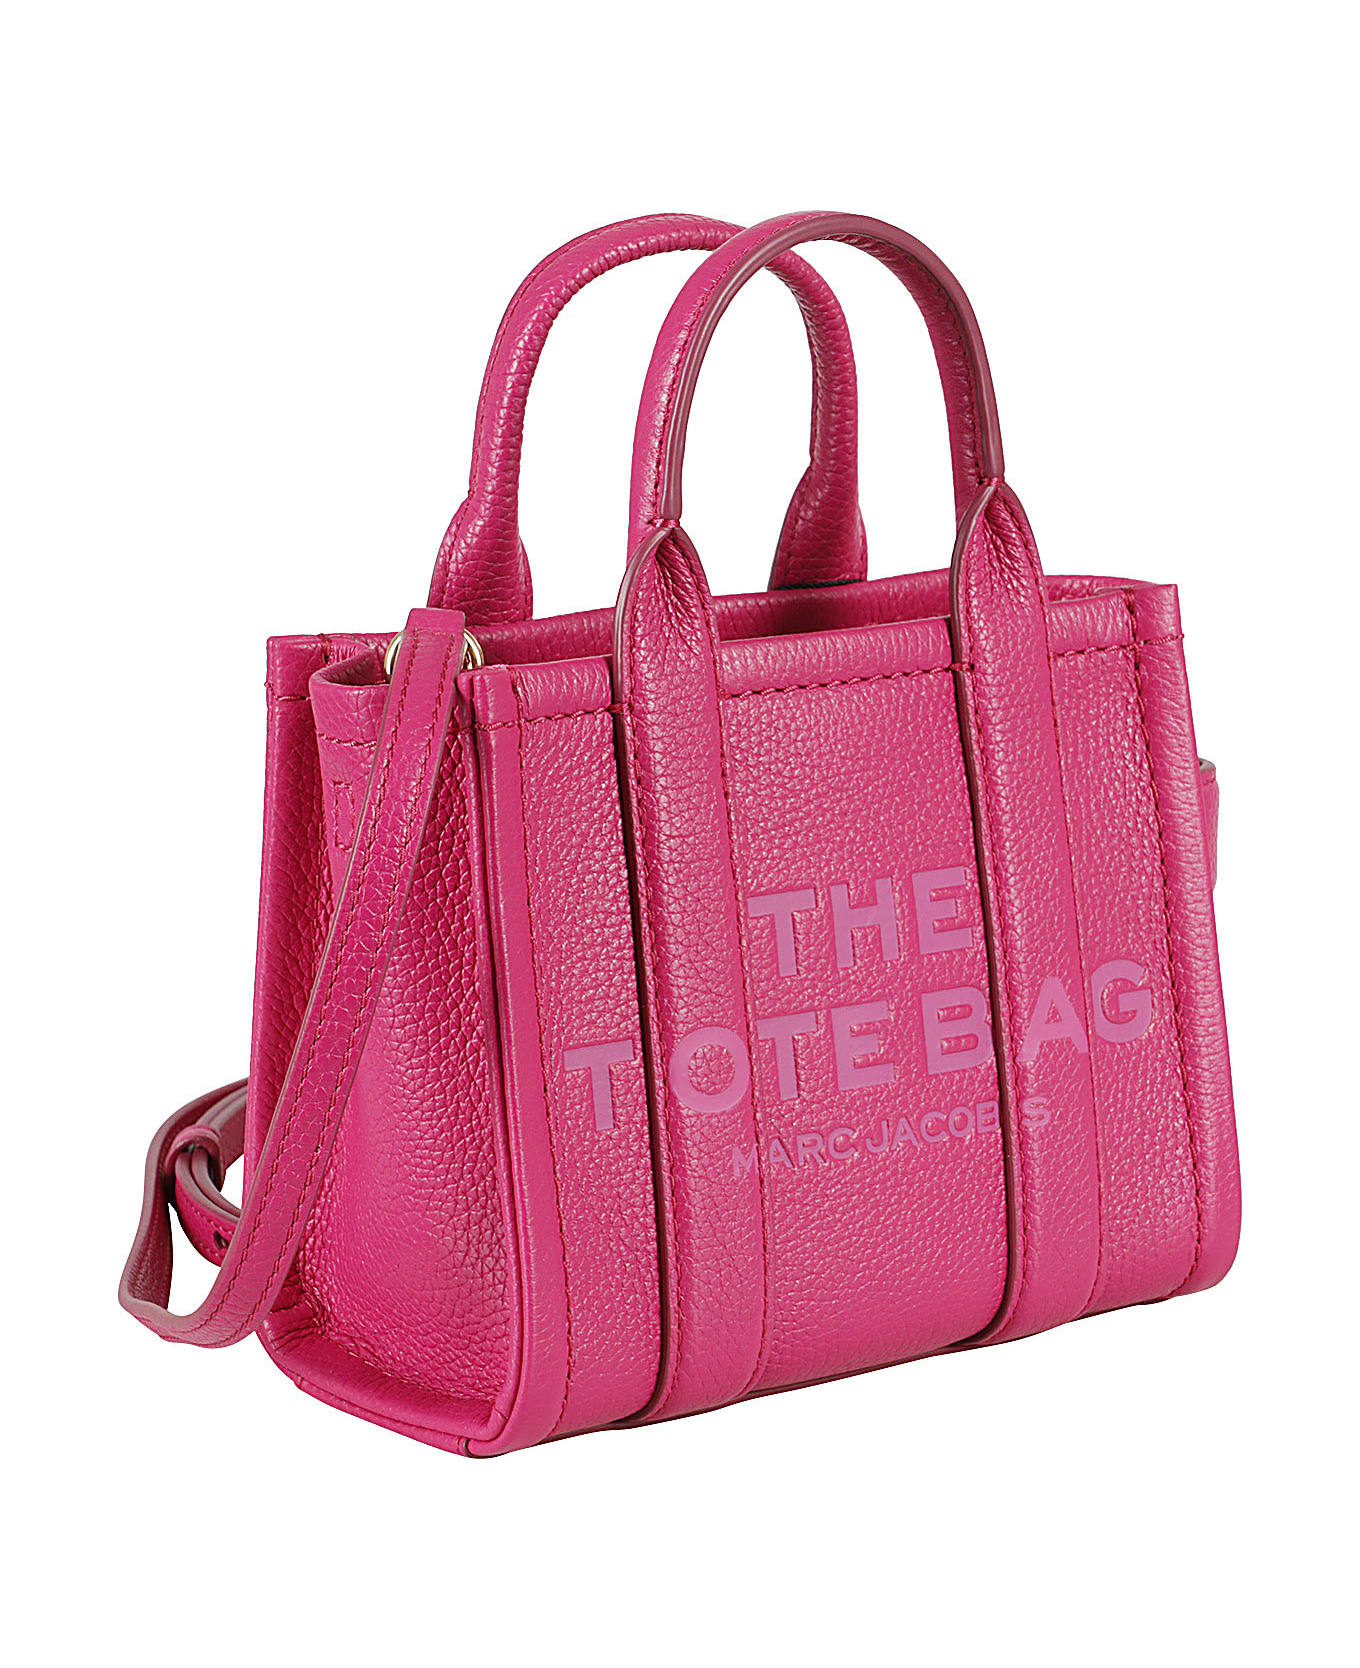 Marc Jacobs The Mini Tote - Lipstick Pink トートバッグ